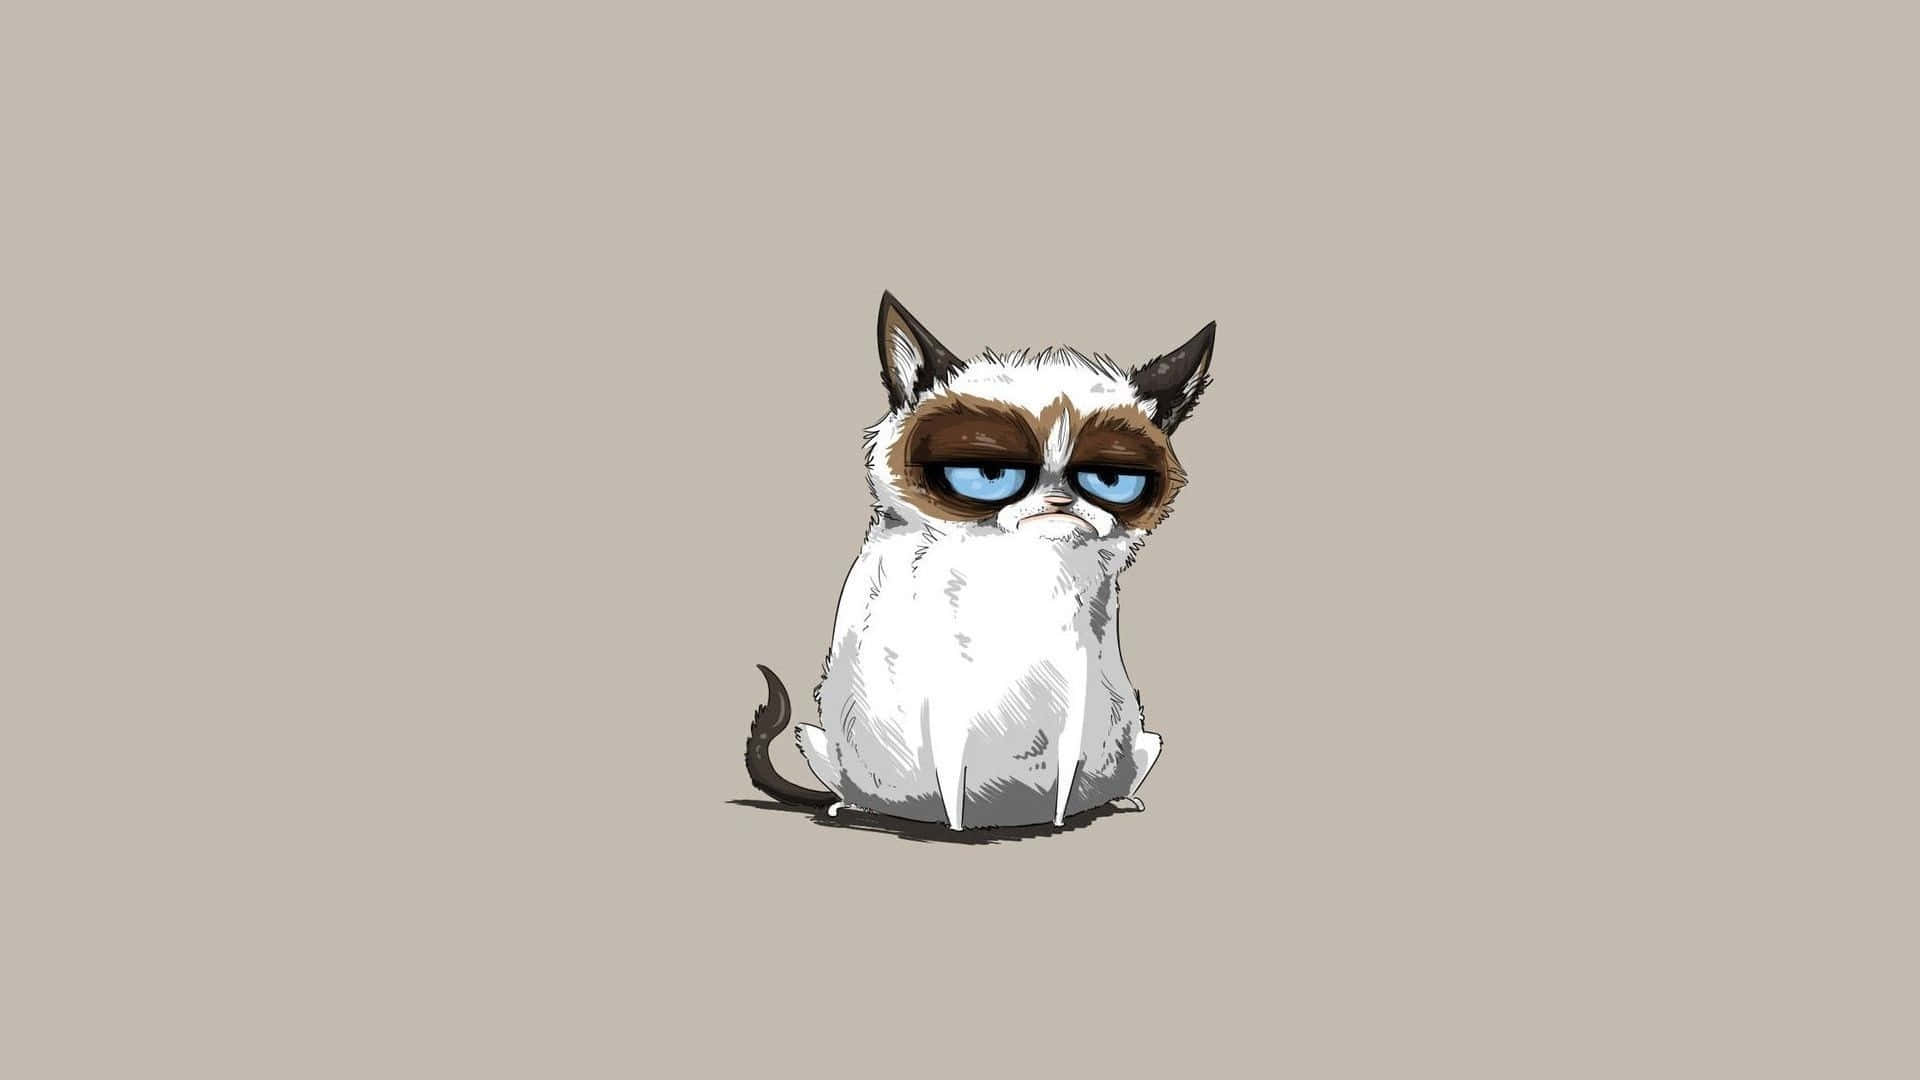 A Curious Cat Glaring: Grumpy In All Its Glory Wallpaper